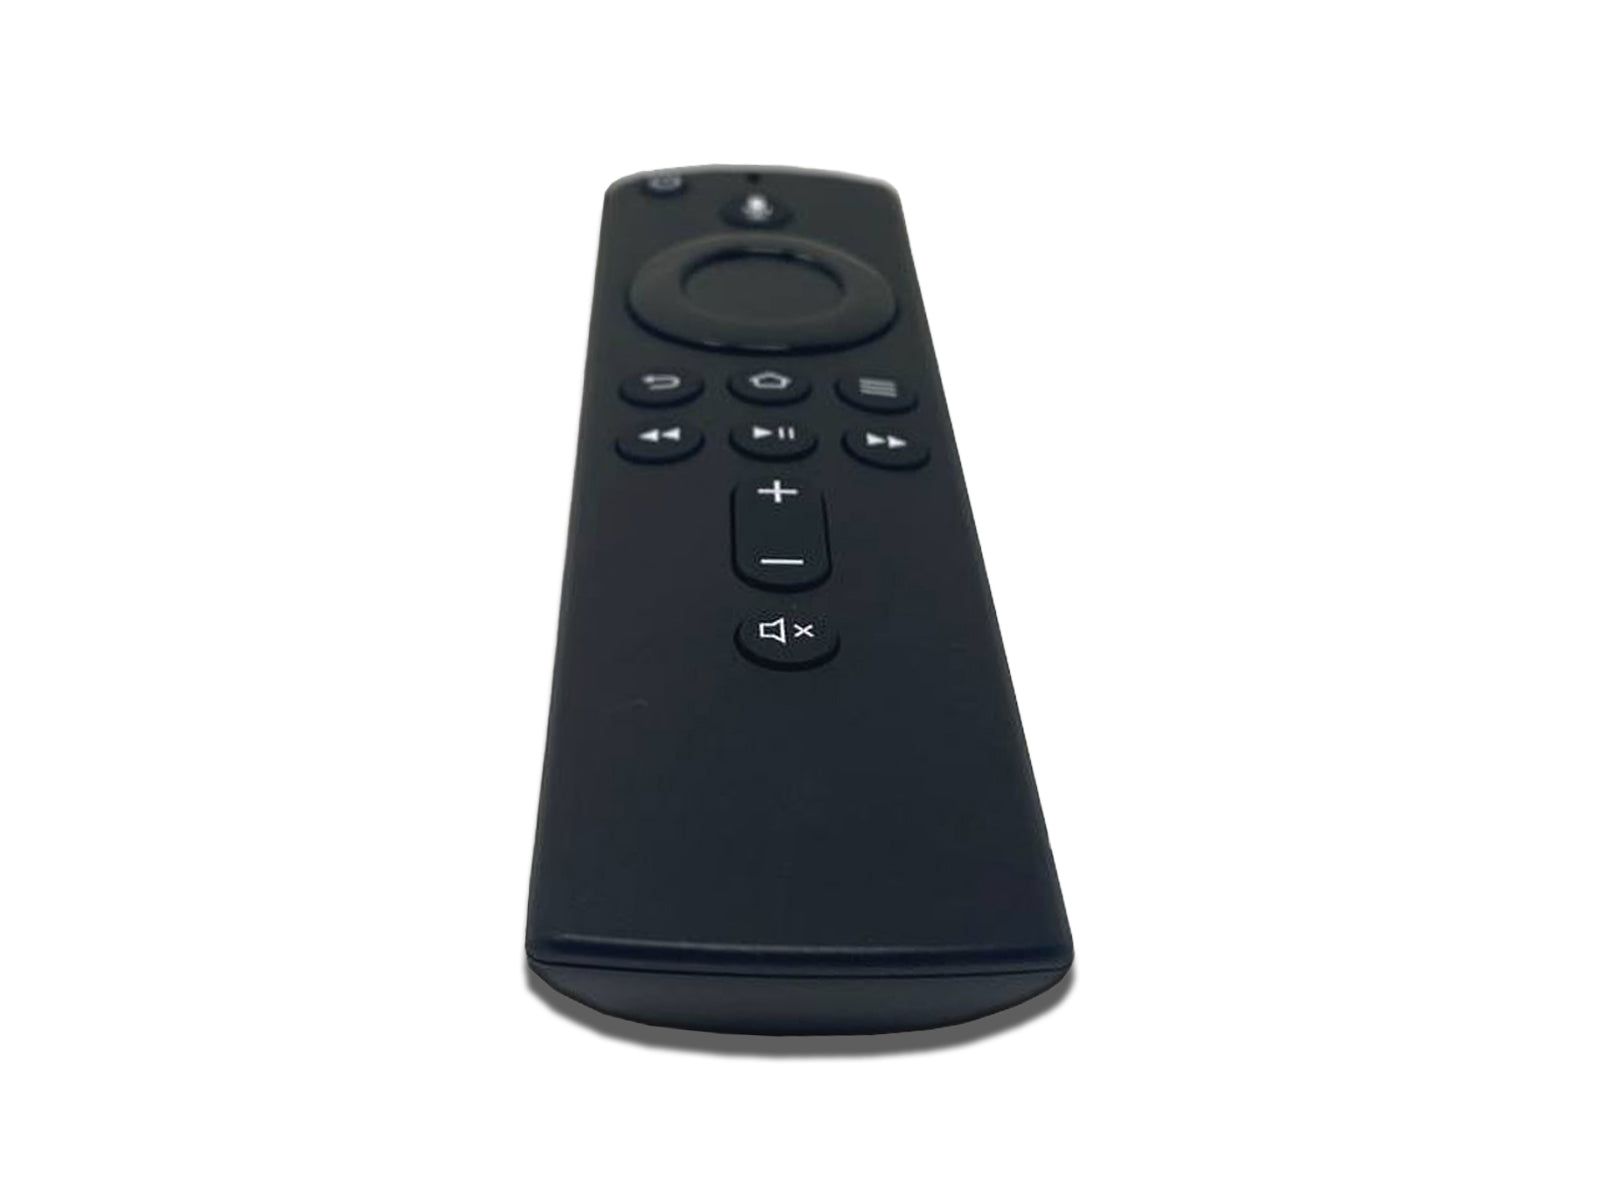 Bottom View Image of The Firestick 2nd Gen Remote Control on The White Background